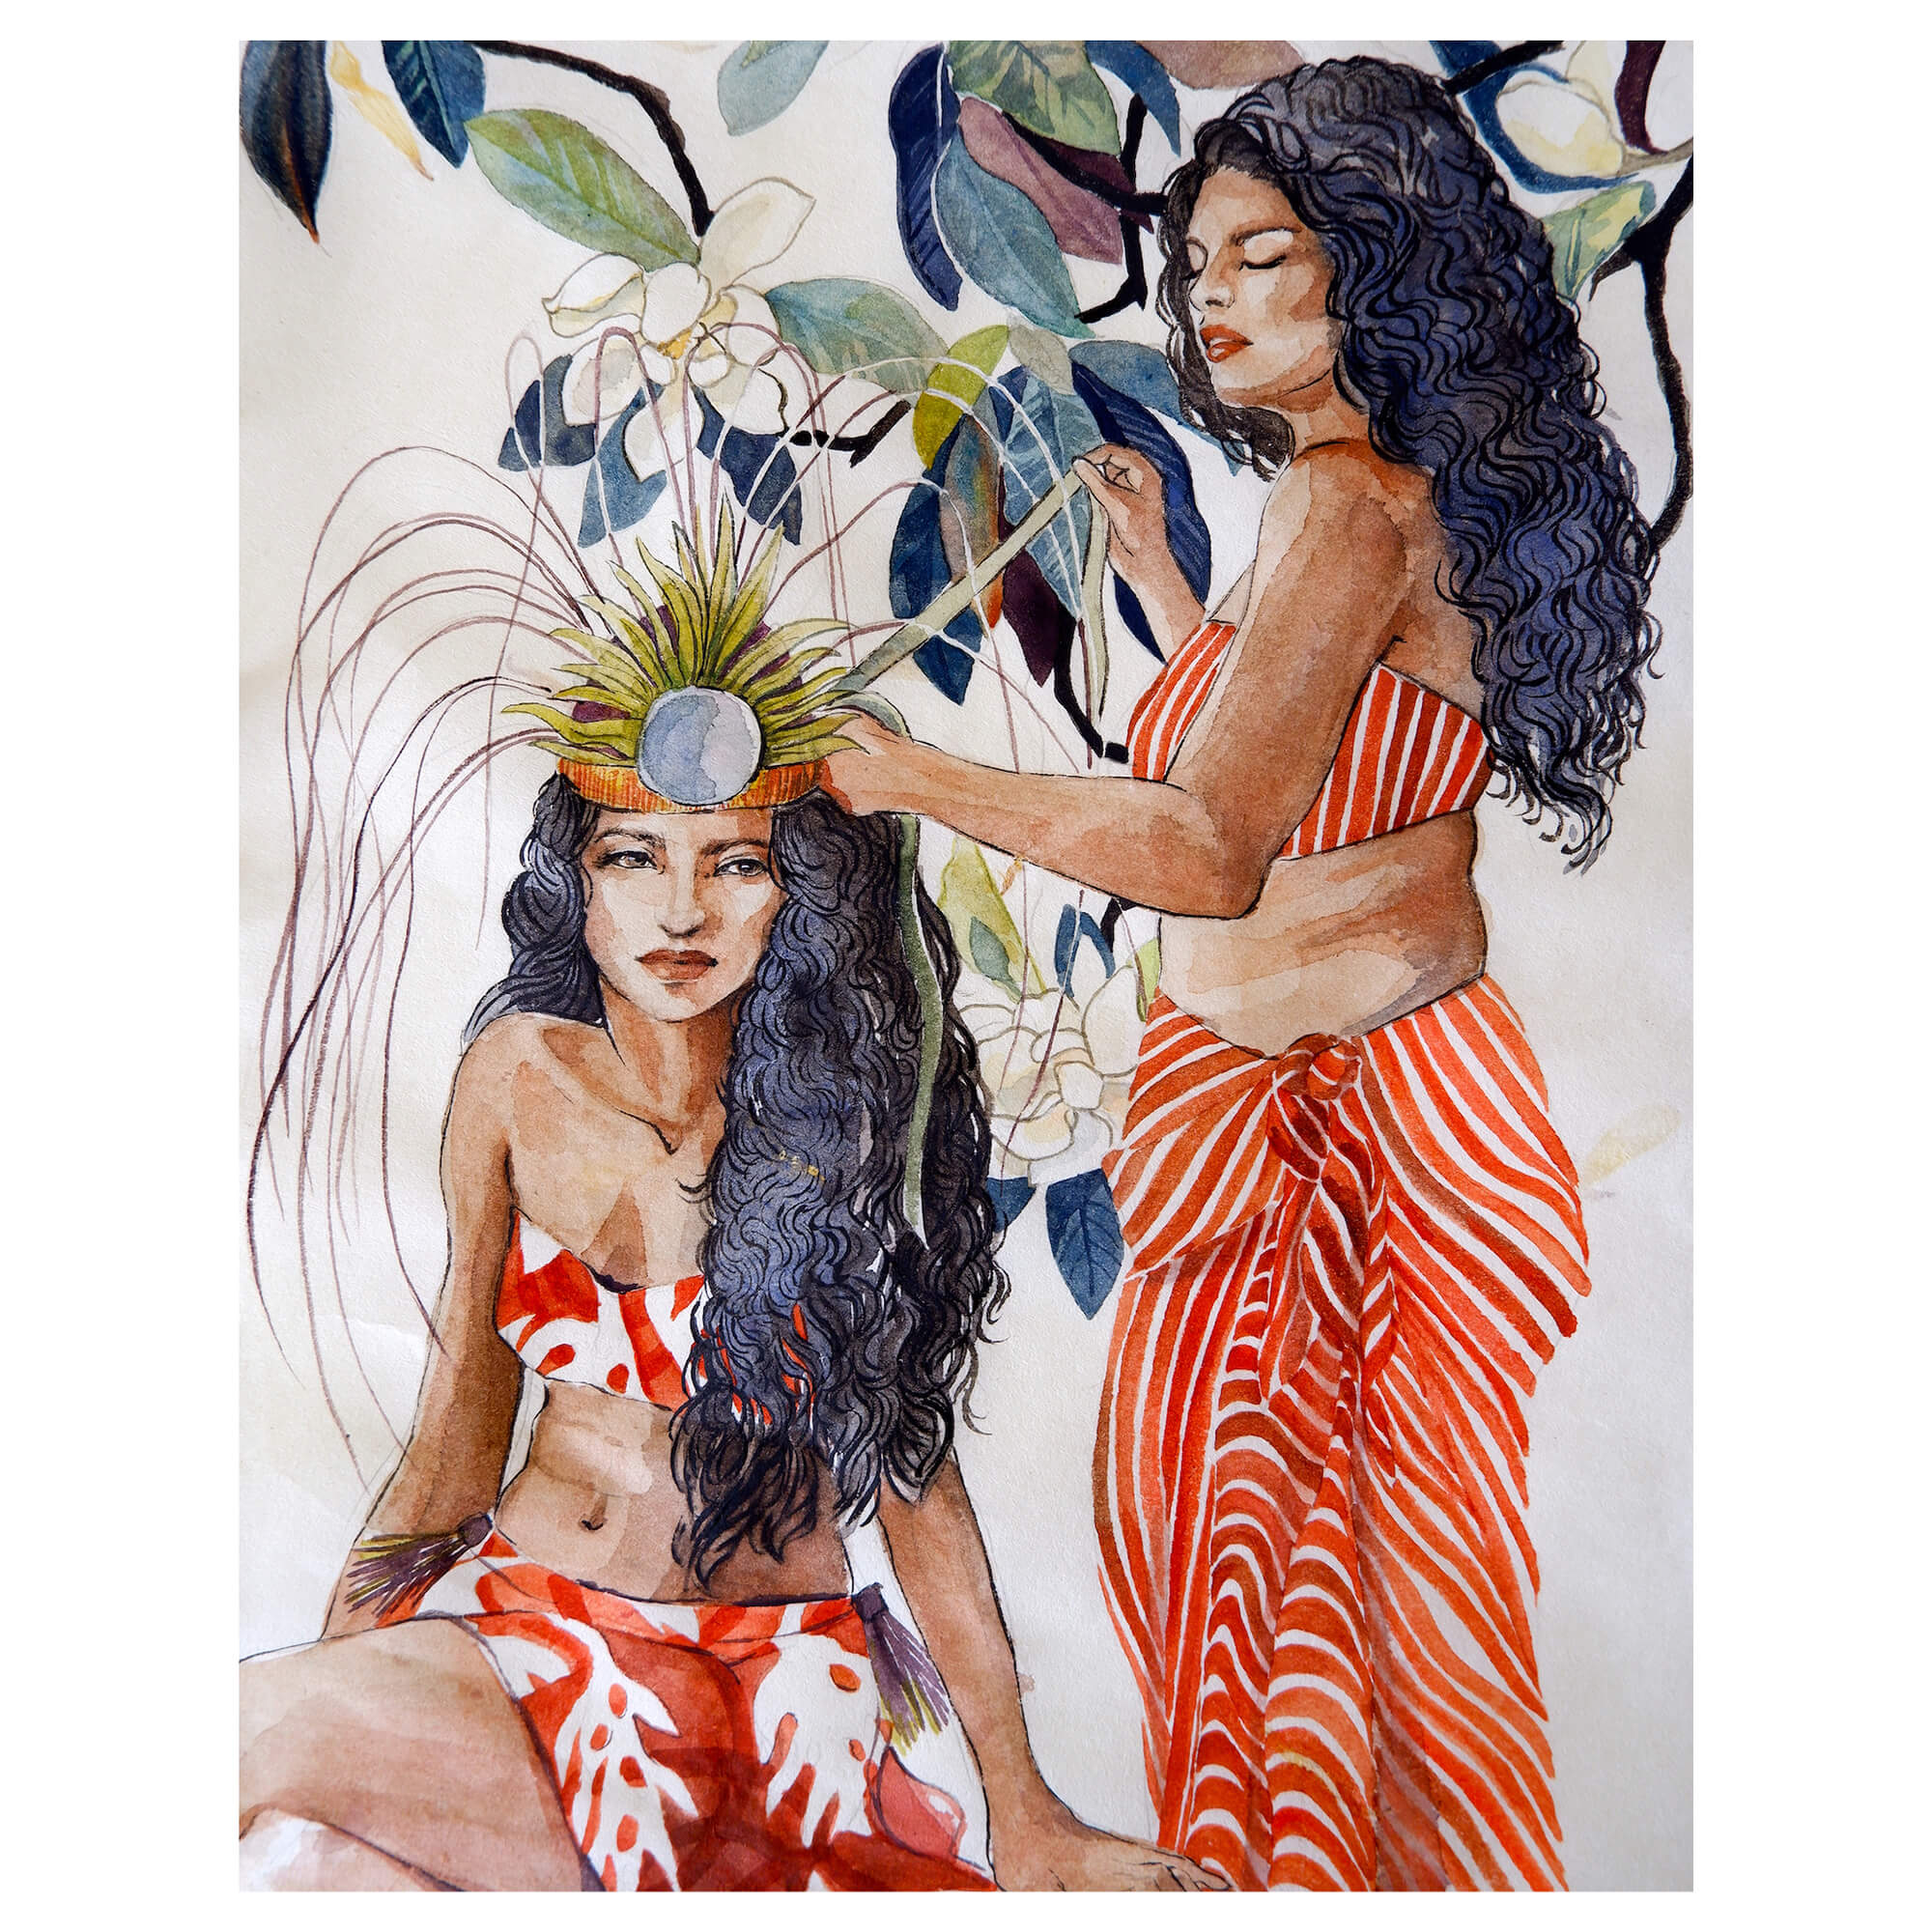 A matted art print of two wahine (women) adorned in traditional Hawaiian garments by Hawaii artist Mae Waite